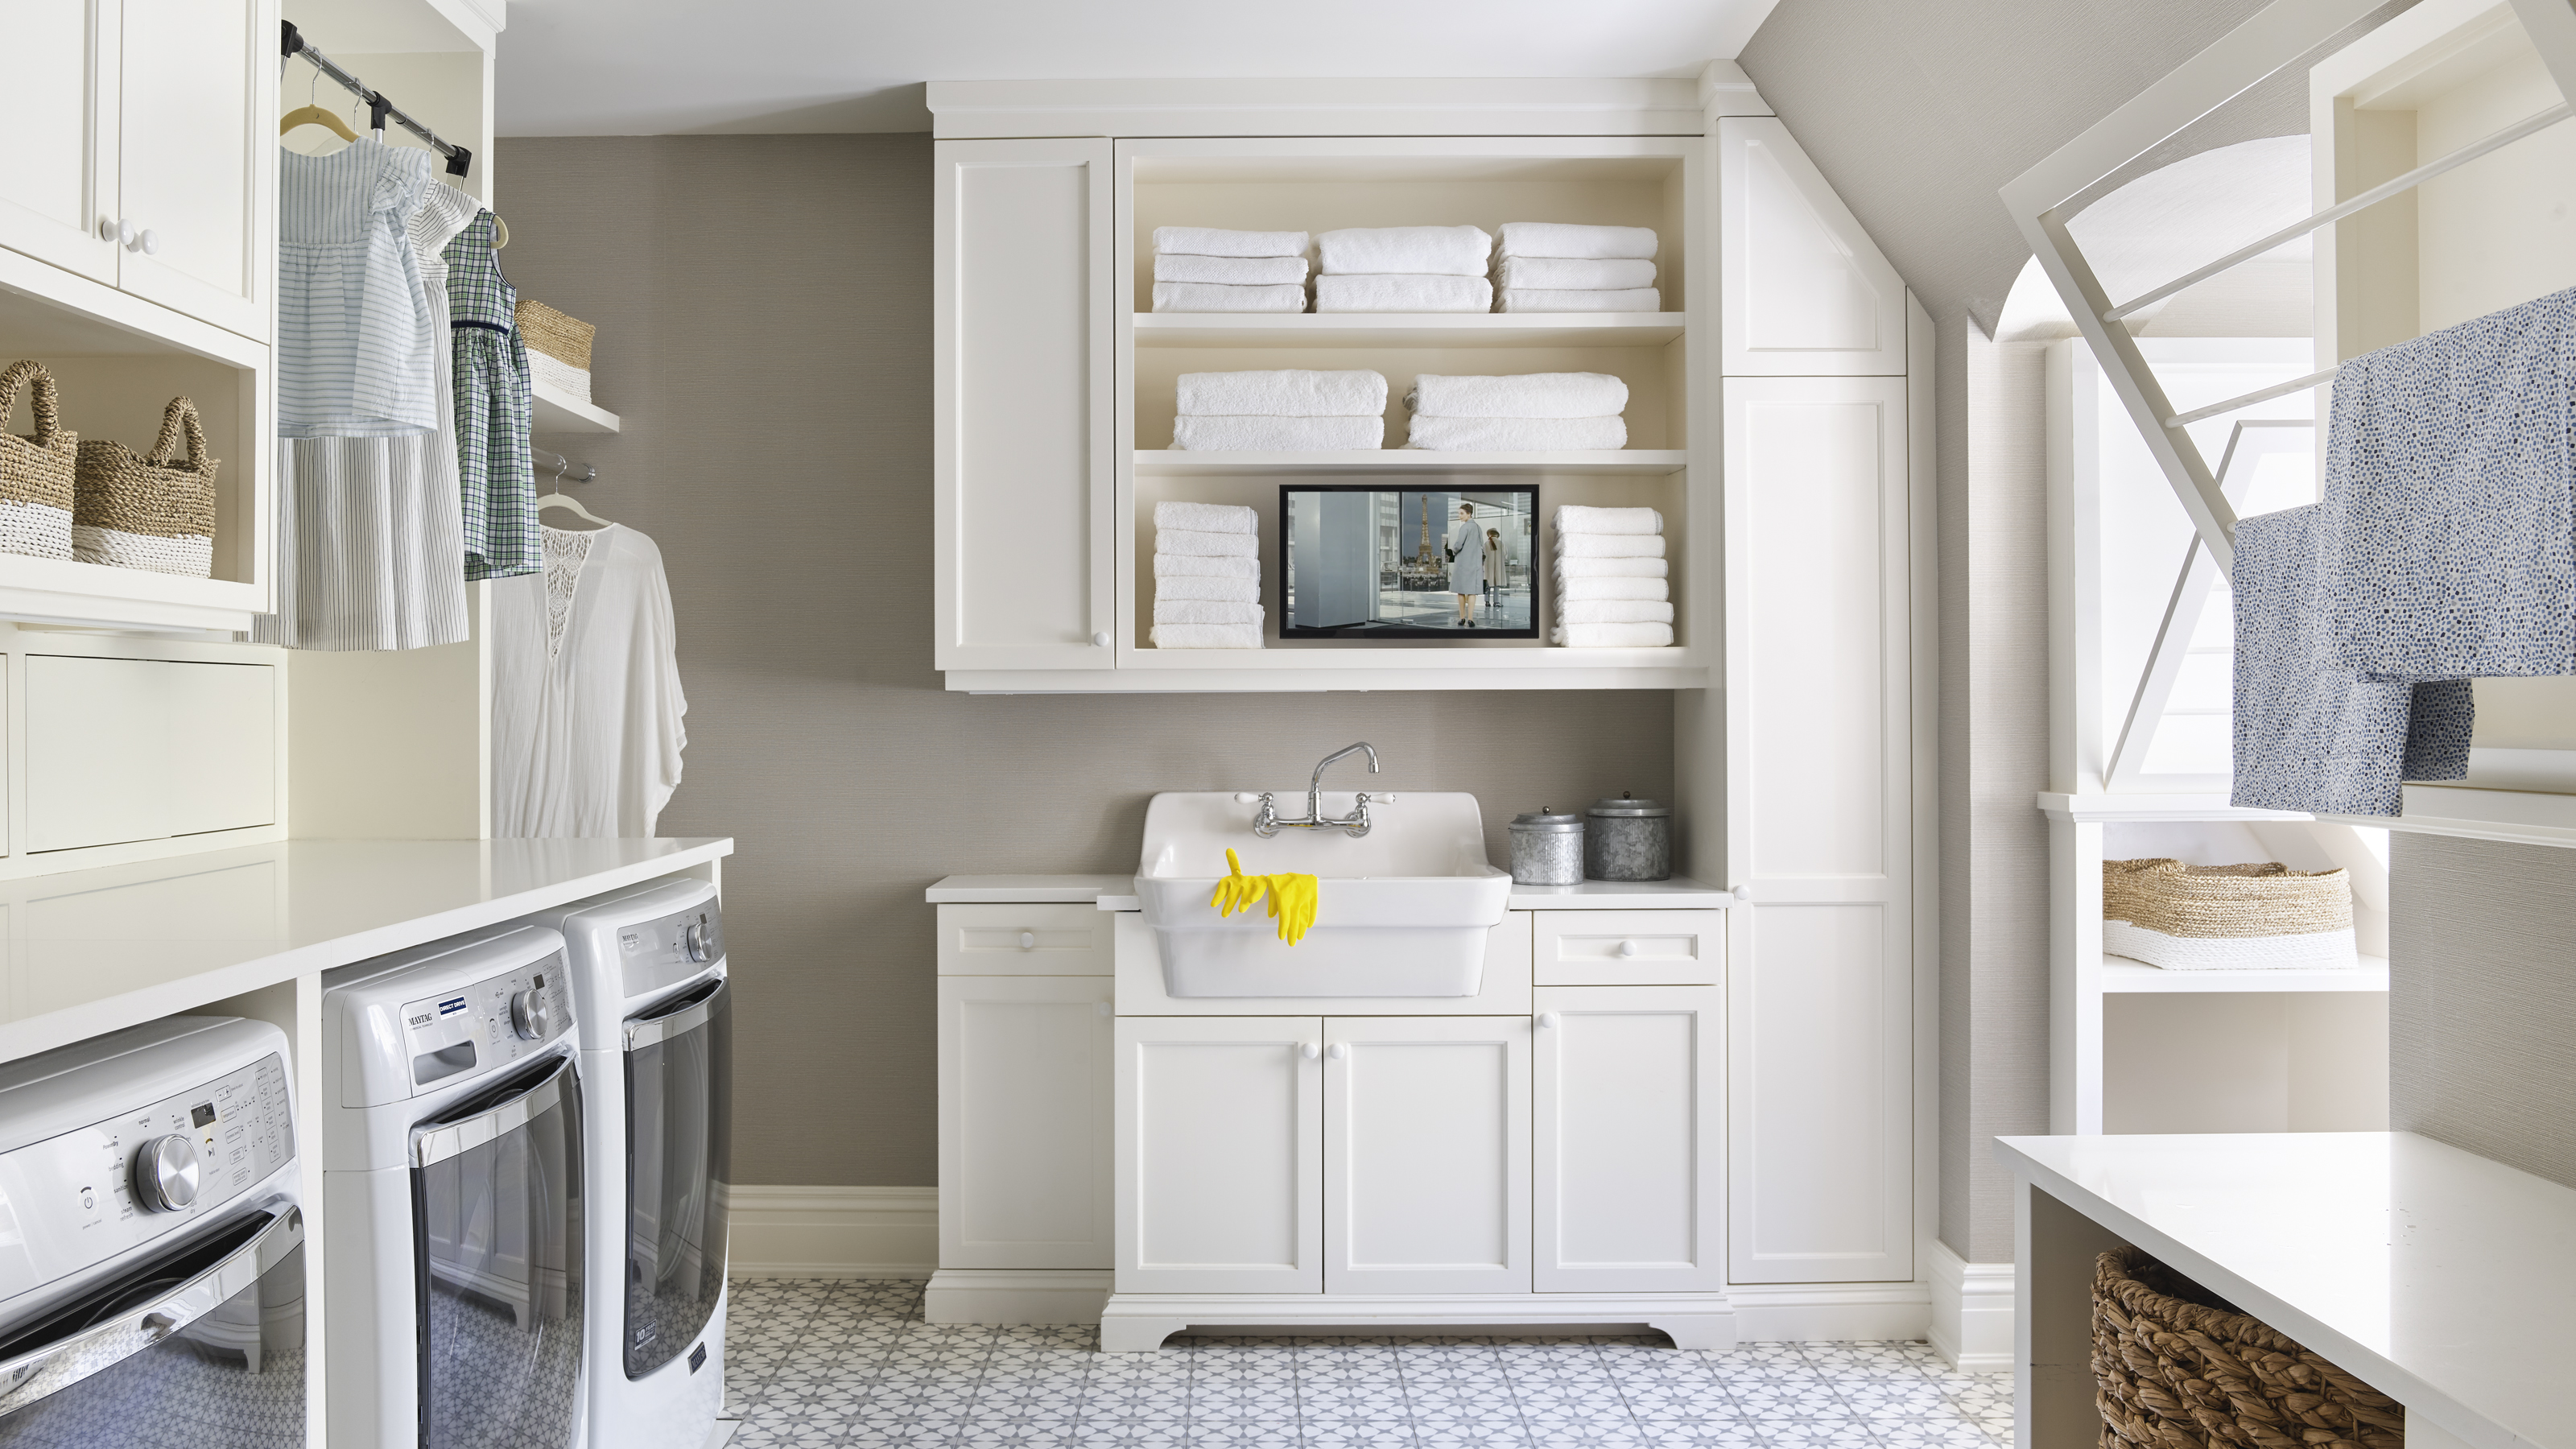 Laundry and Utility Room Organization